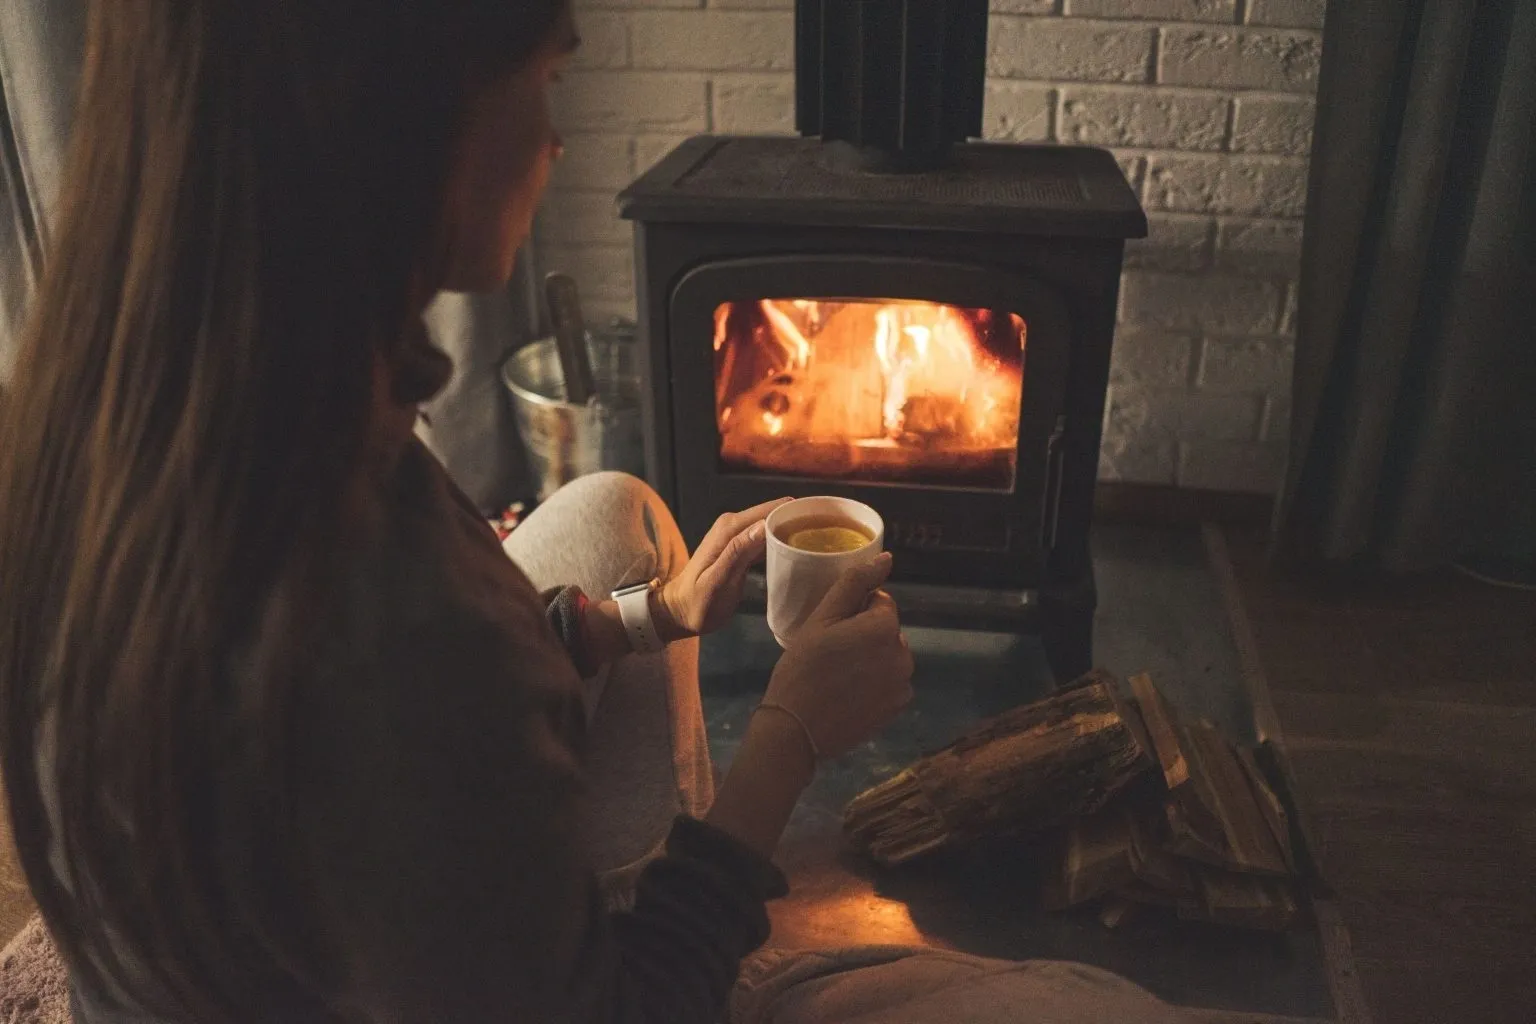 A person sitting in front of an open fire holding a cup.